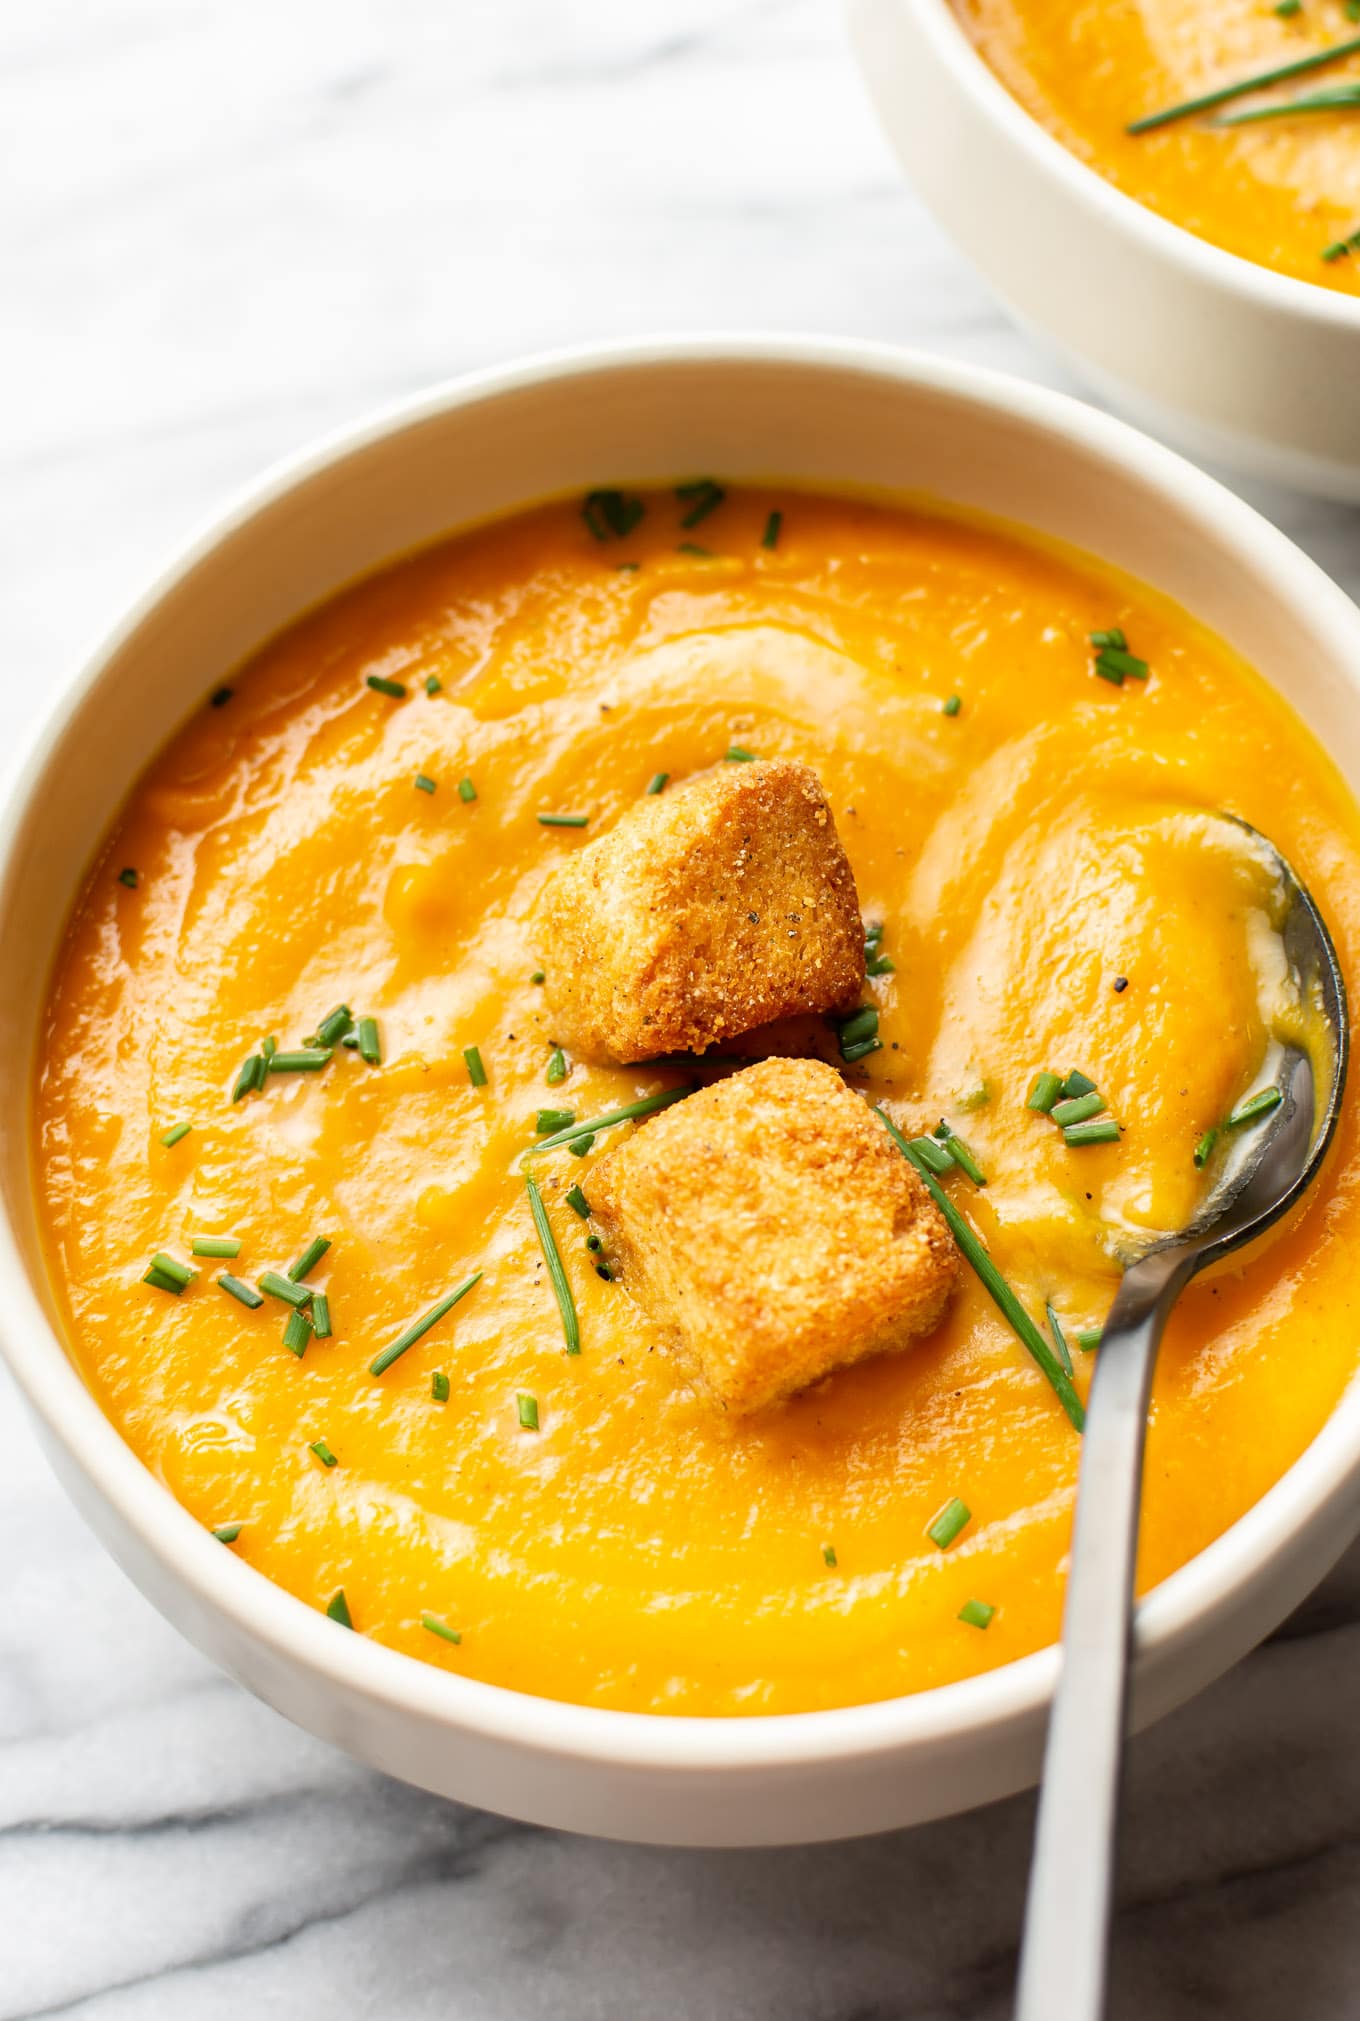 Culinary Creations: Sweet and spicy pumpkin soup